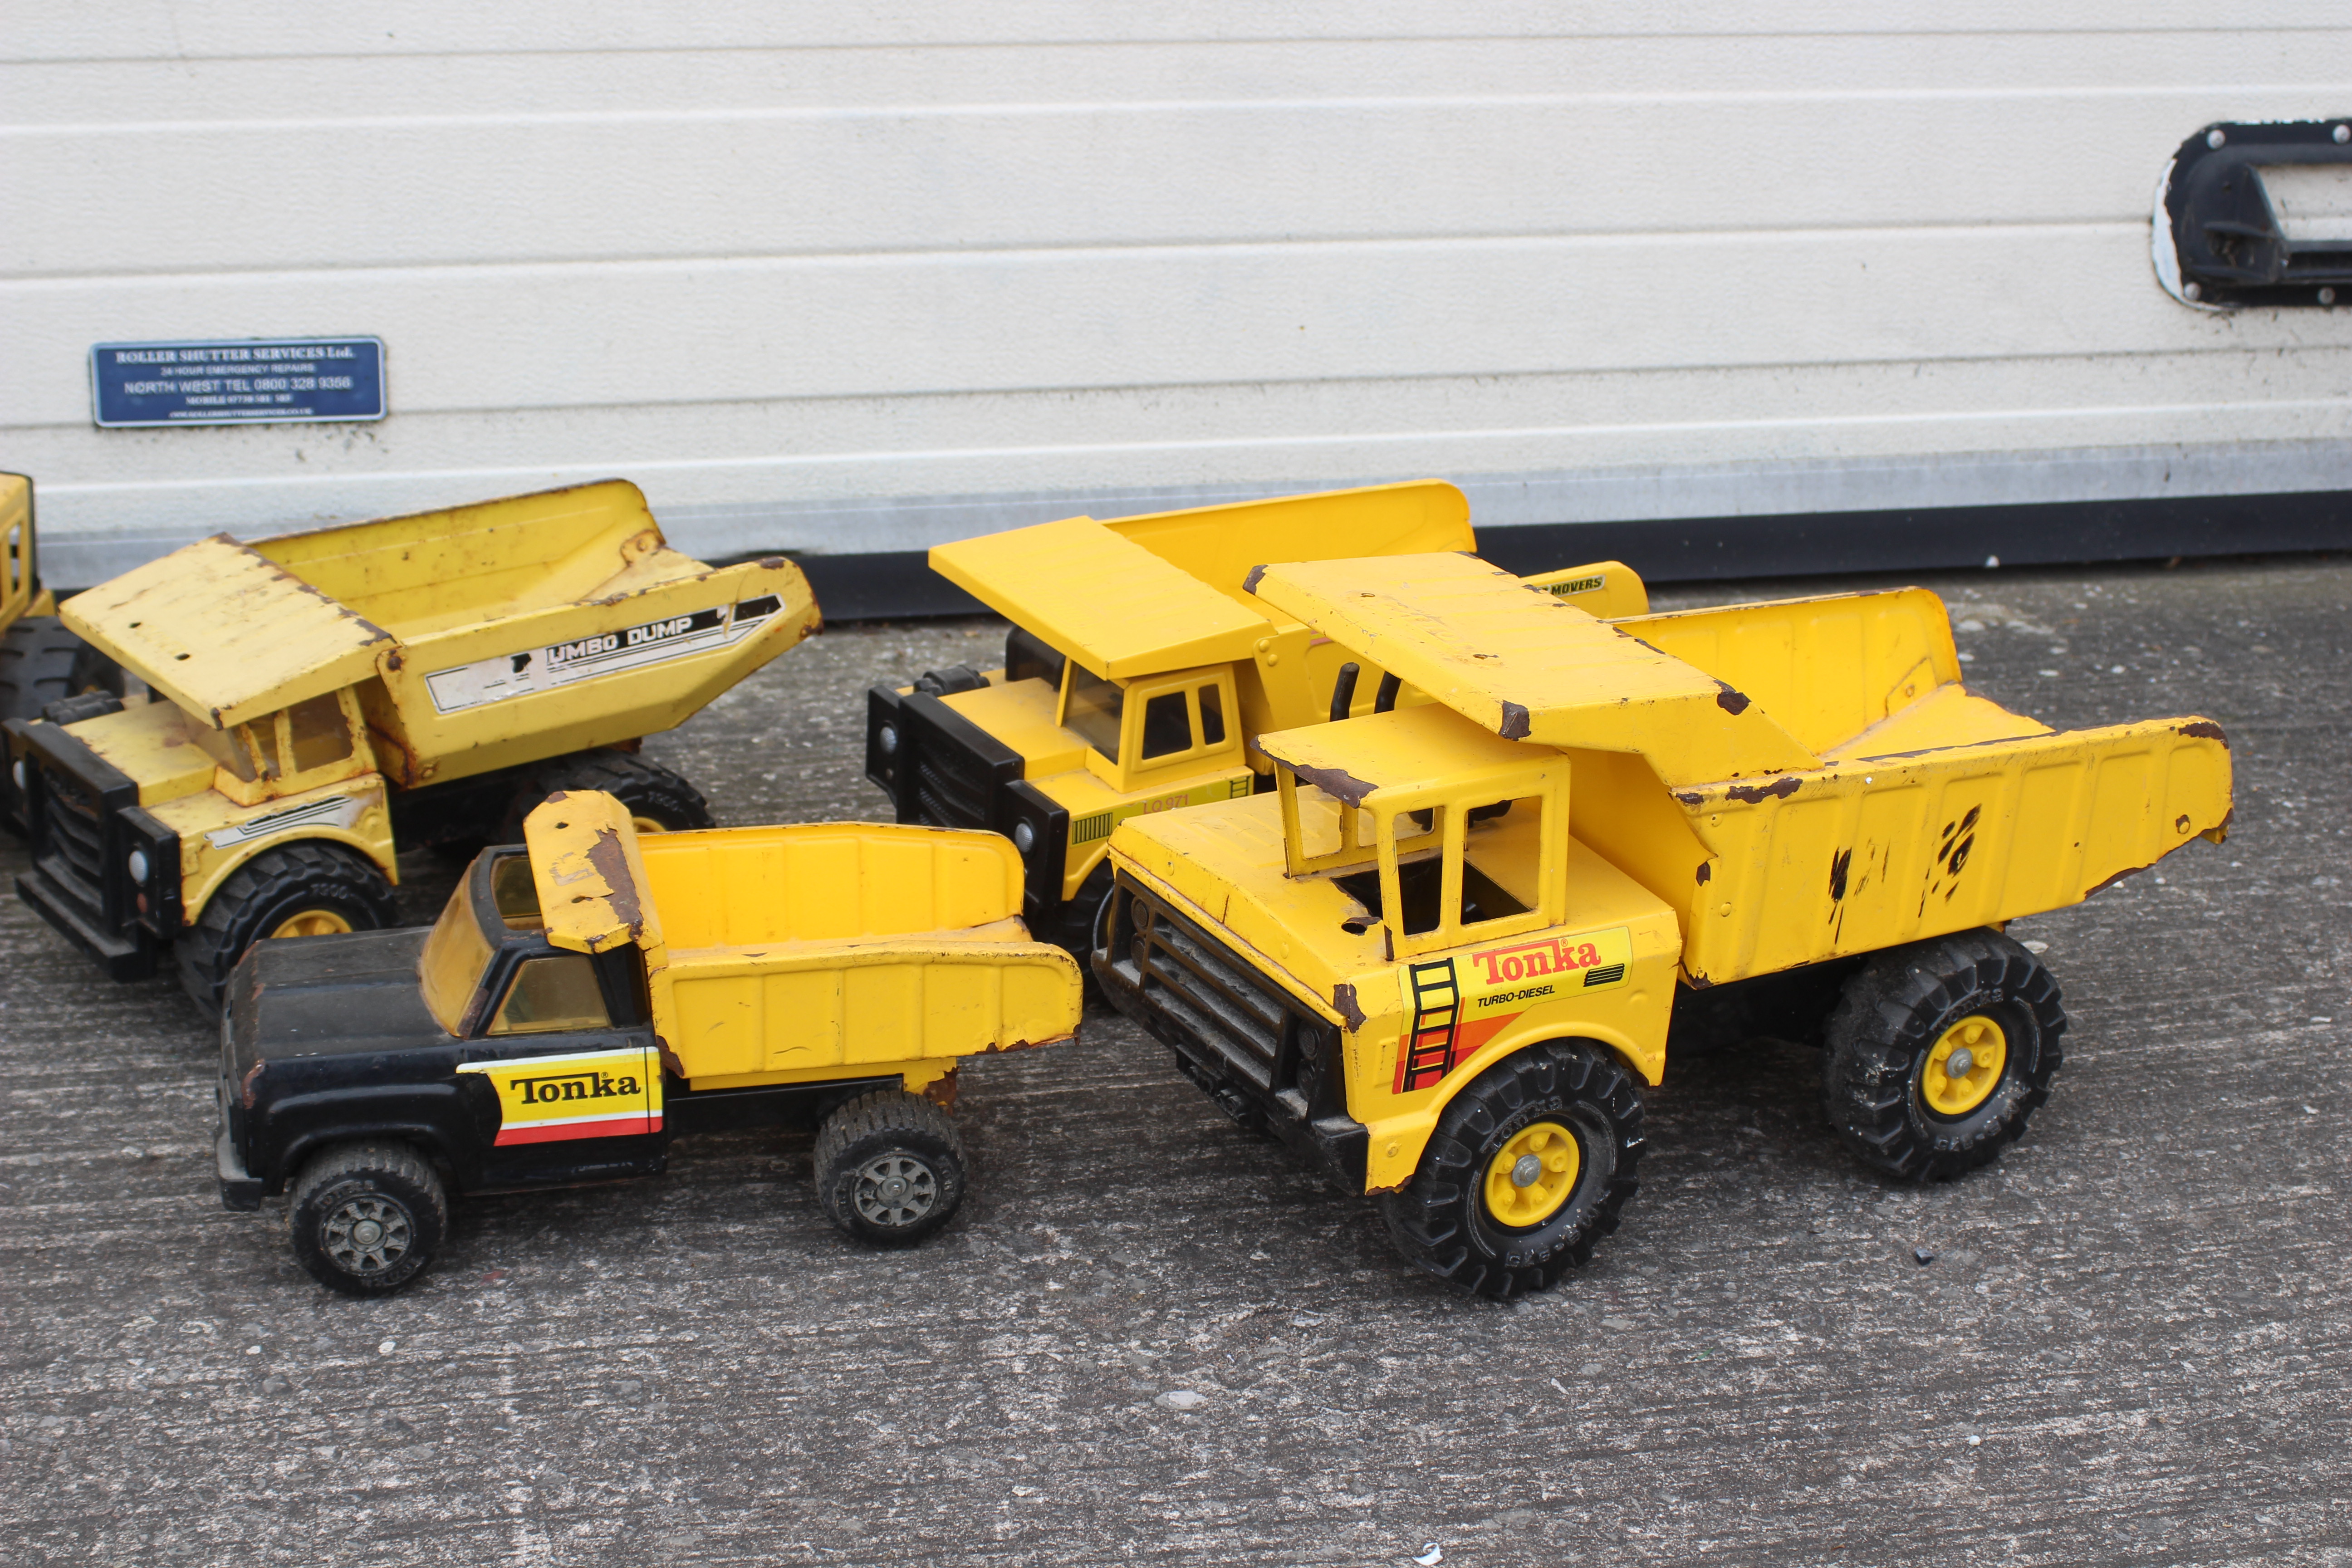 Tonka - Matchbox - Clover - 5 x large vintage Tonka construction vehicles including a Mighty Loader, - Image 3 of 4